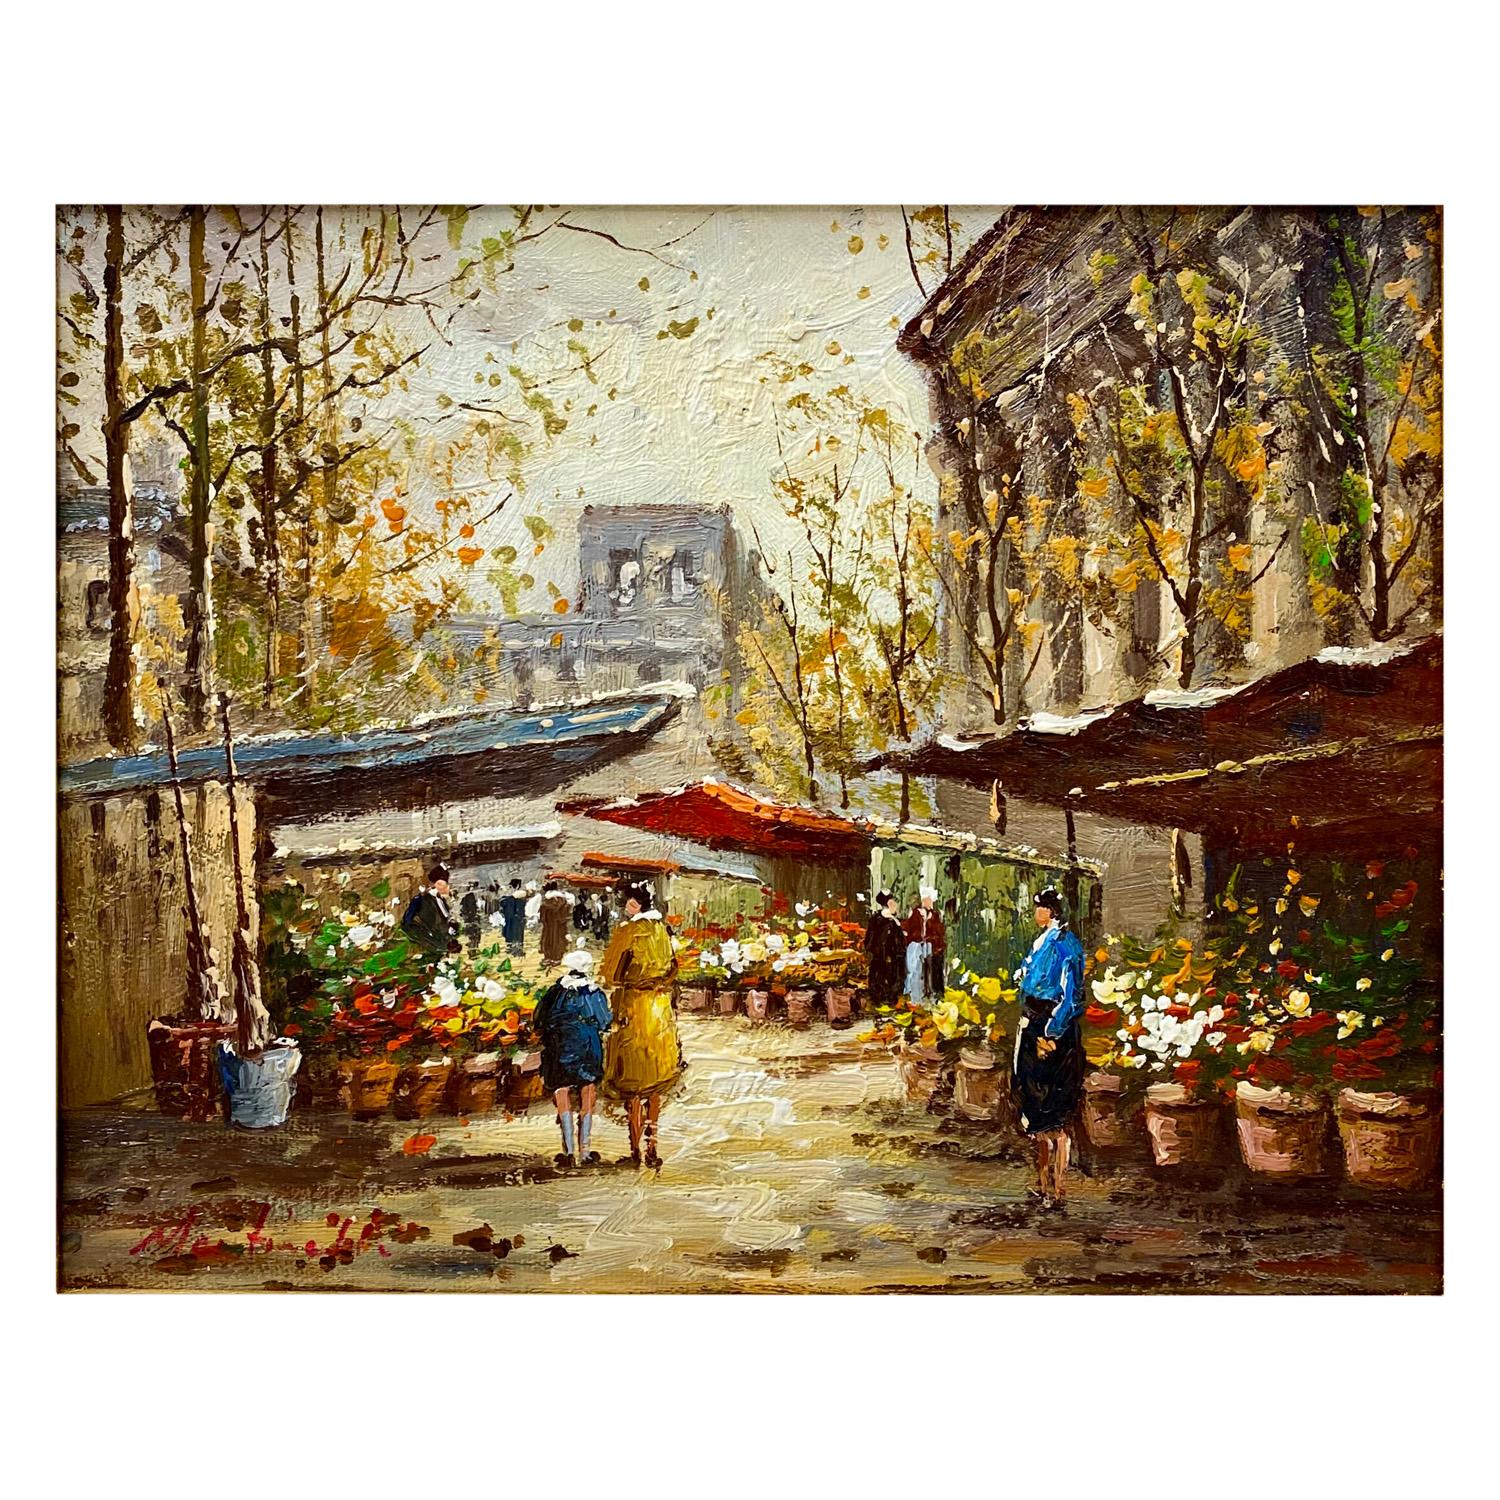 Impressionistic Oil on Canvas Painting of an Outdoor Market in the City, Signed  - Brown Landscape Painting by Unknown